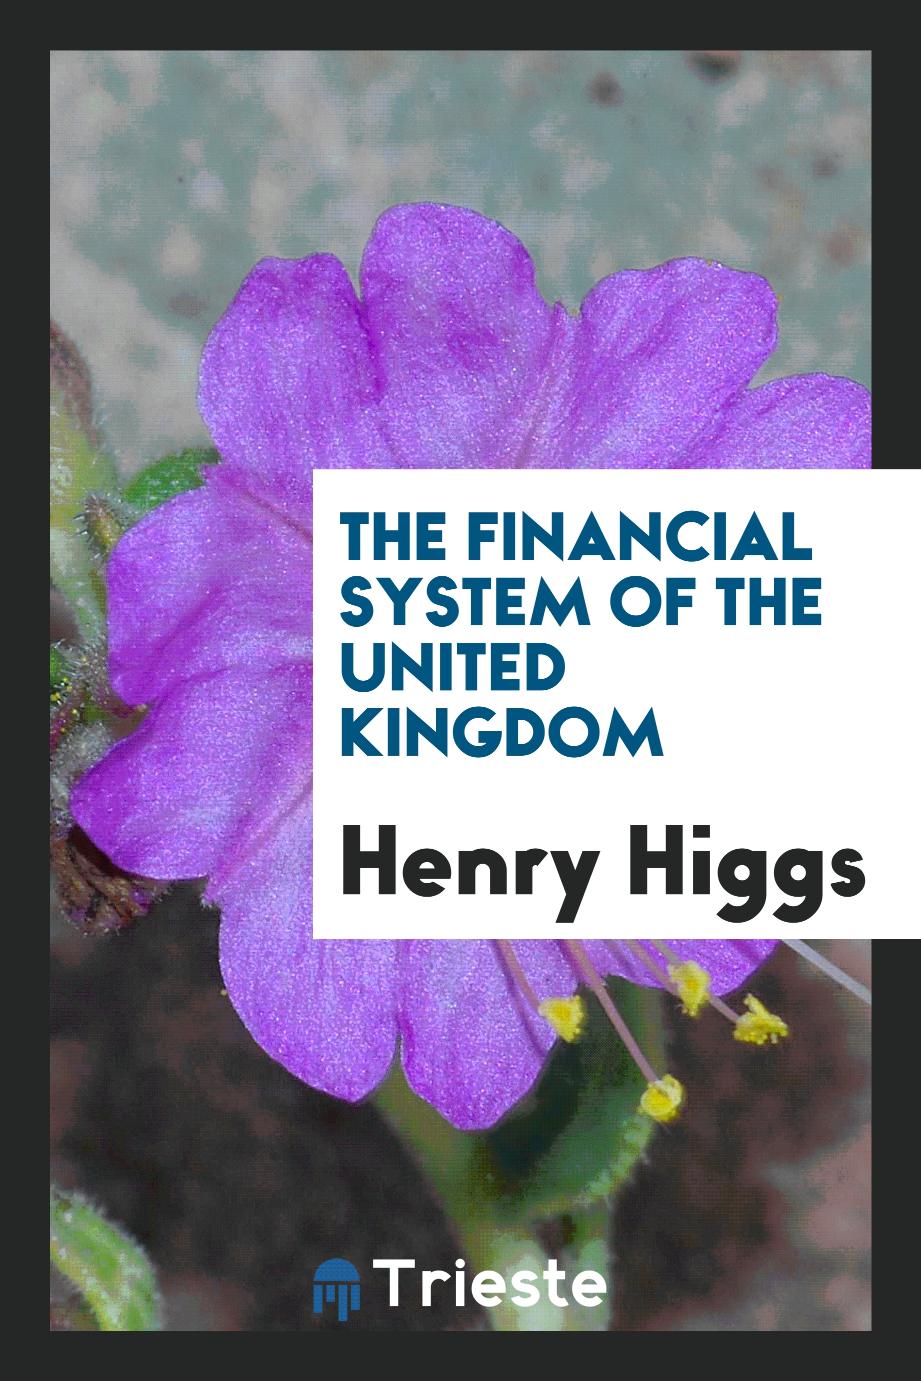 The financial system of the United Kingdom